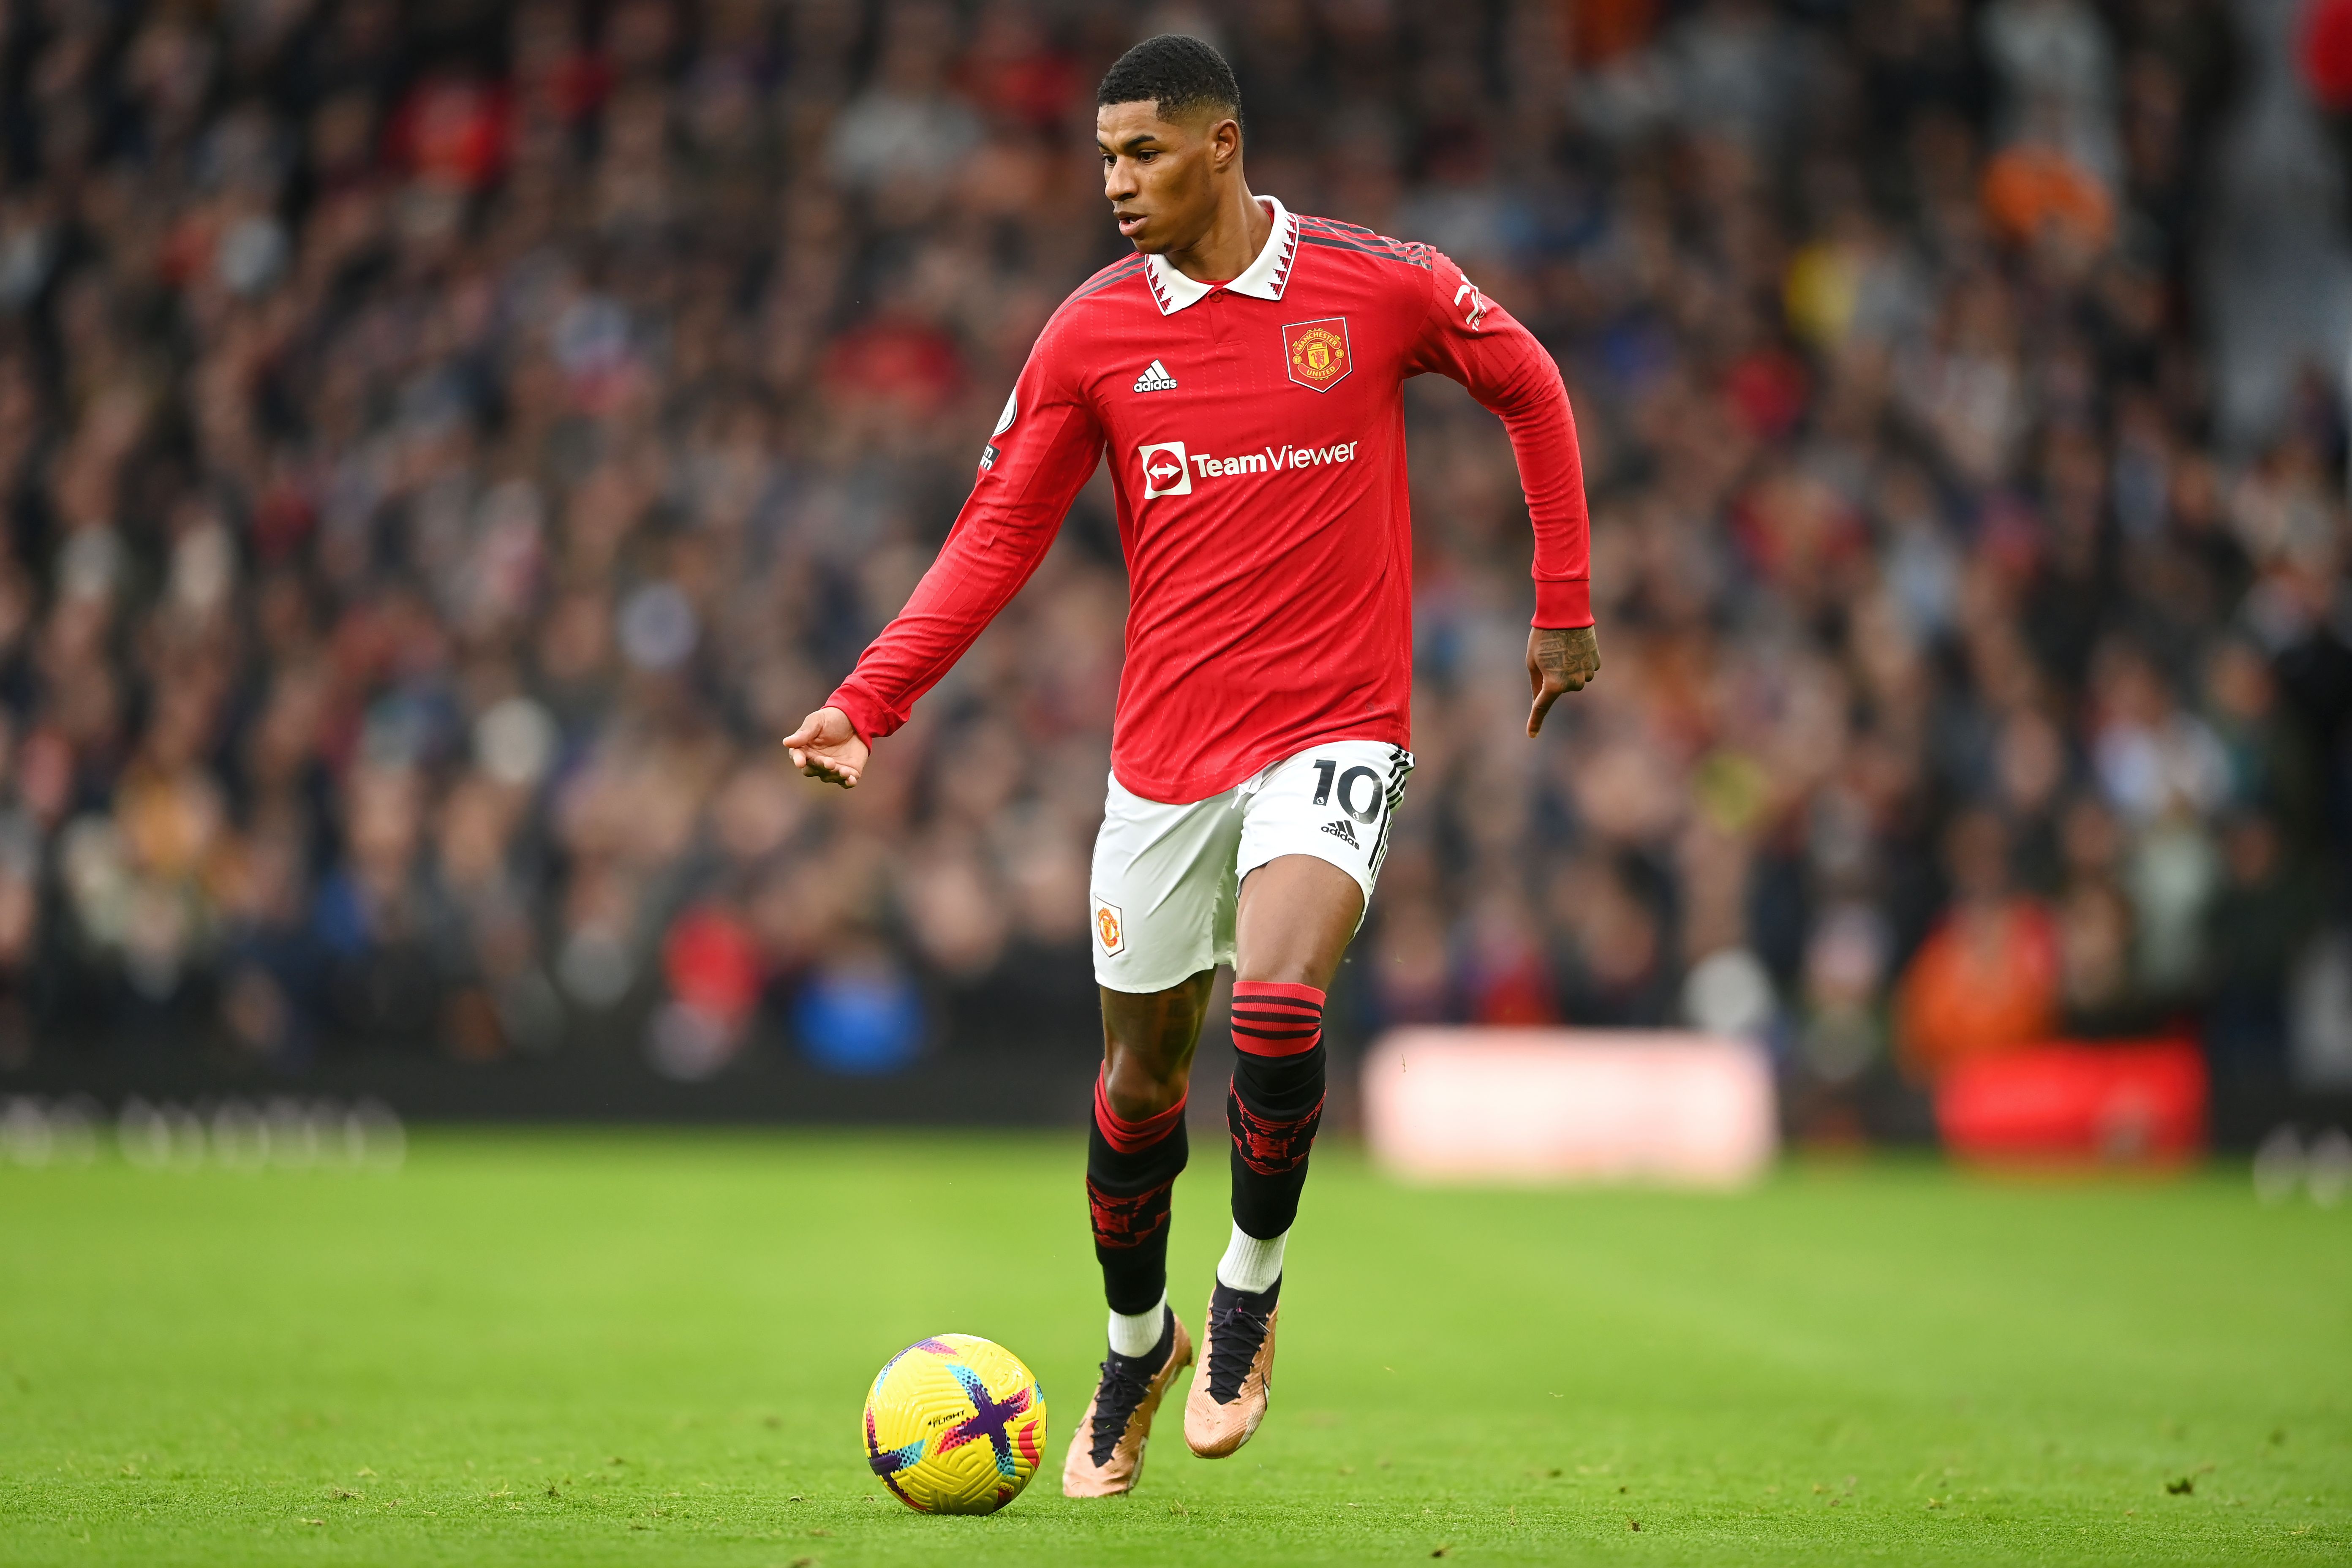  Marcus Rashford of Manchester United in action during the Premier League match between Manchester United and Manchester City at Old Trafford on January 14, 2023 in Manchester, England.